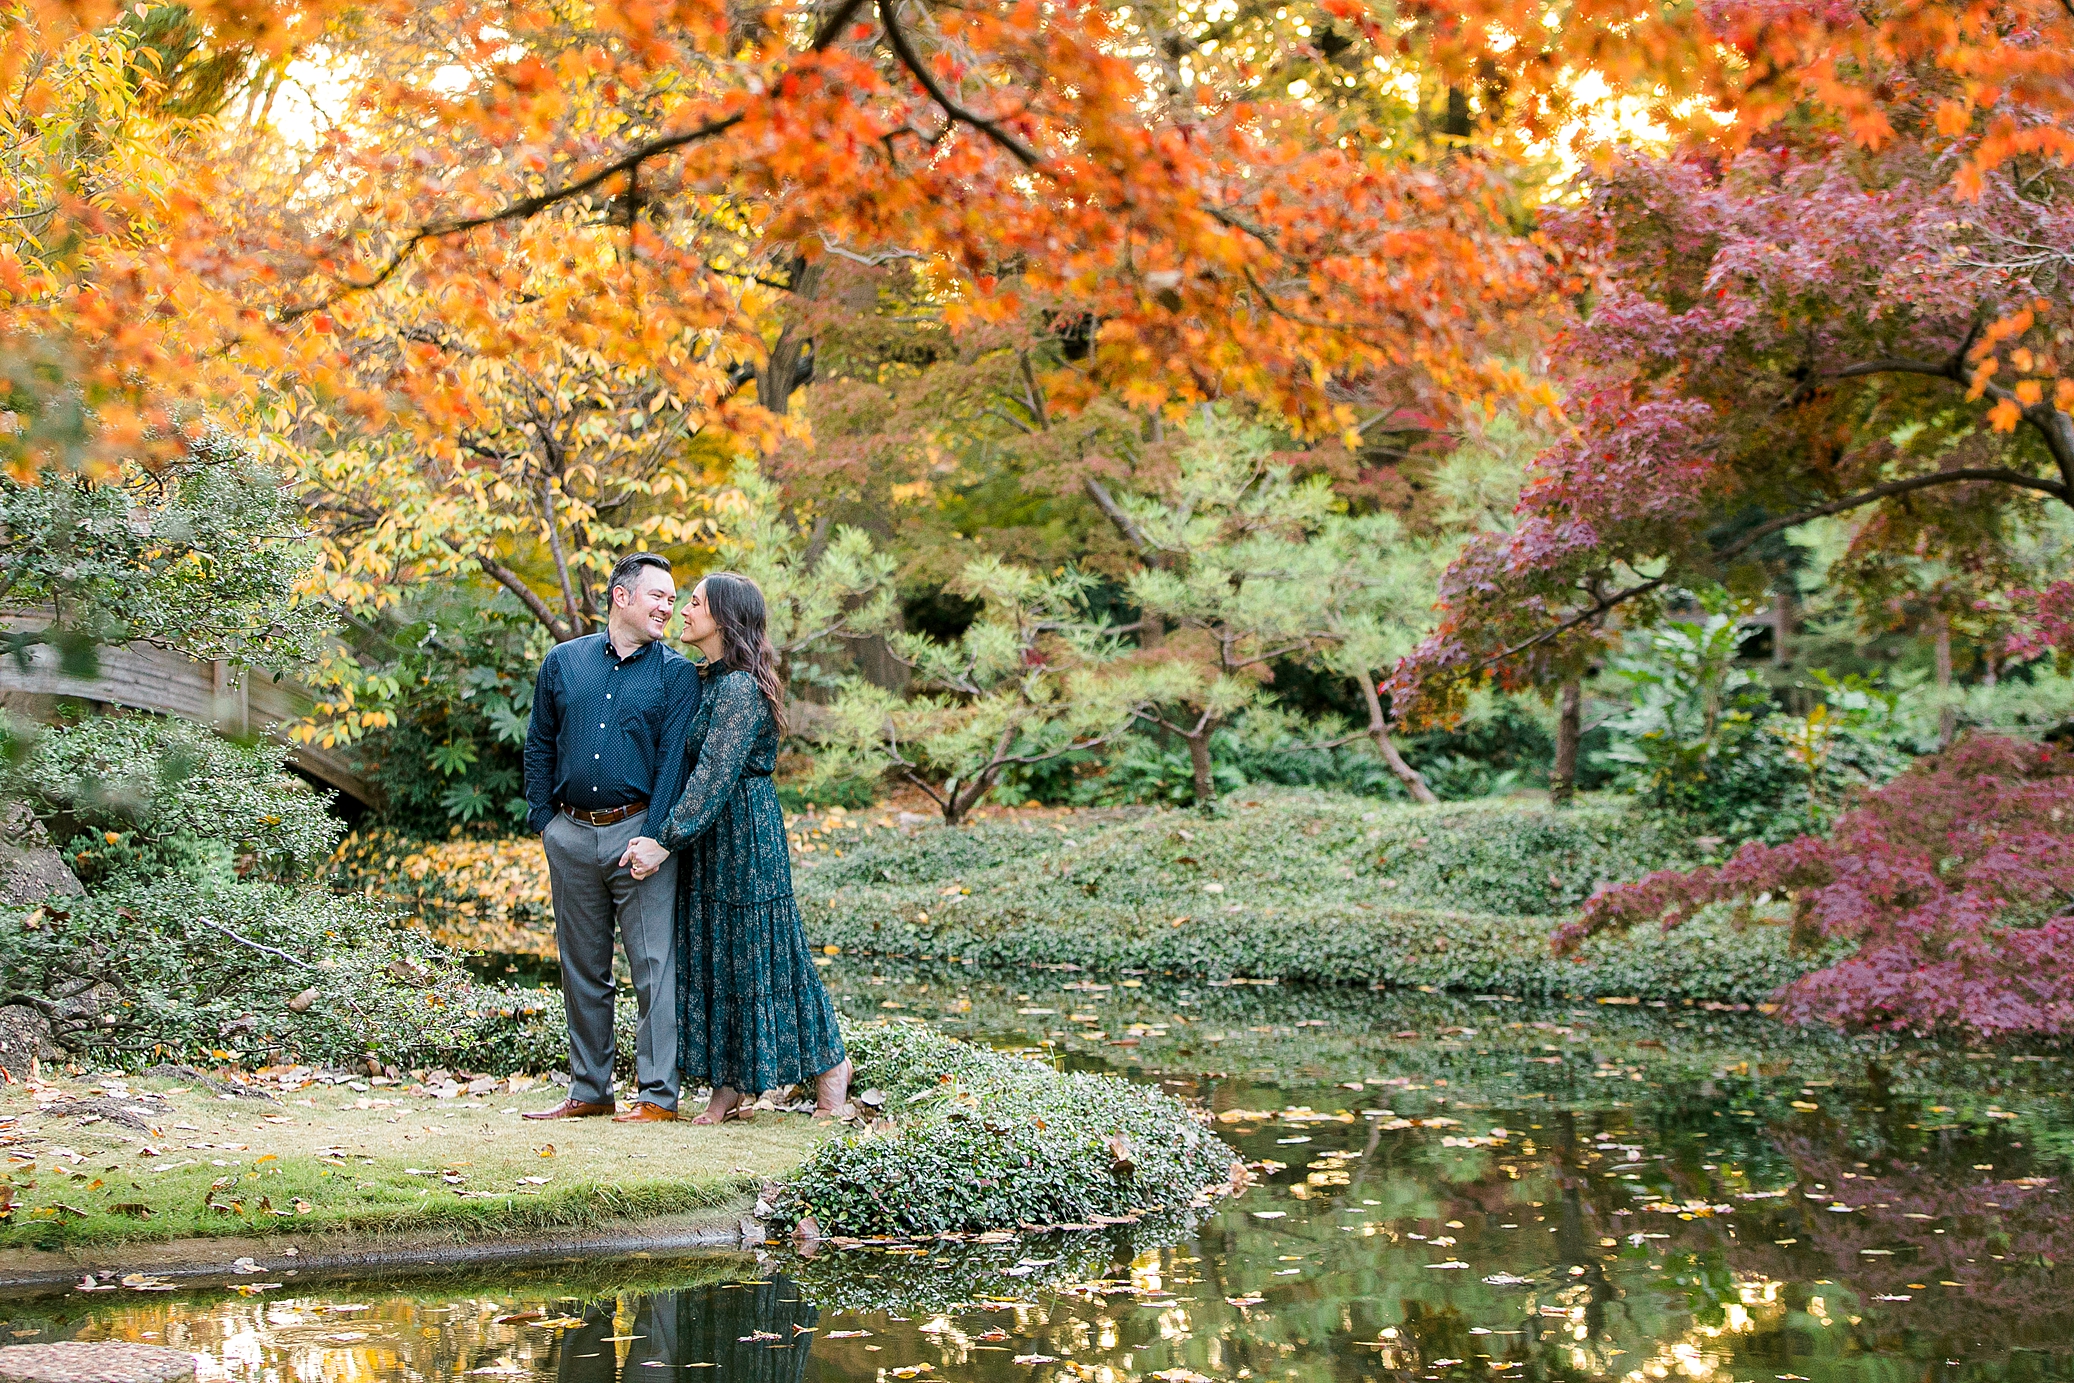 An engaged couple nuzzles under a tree full of orange leaves inside the Japanese Gardens at The Fort Worth Botanic Garden